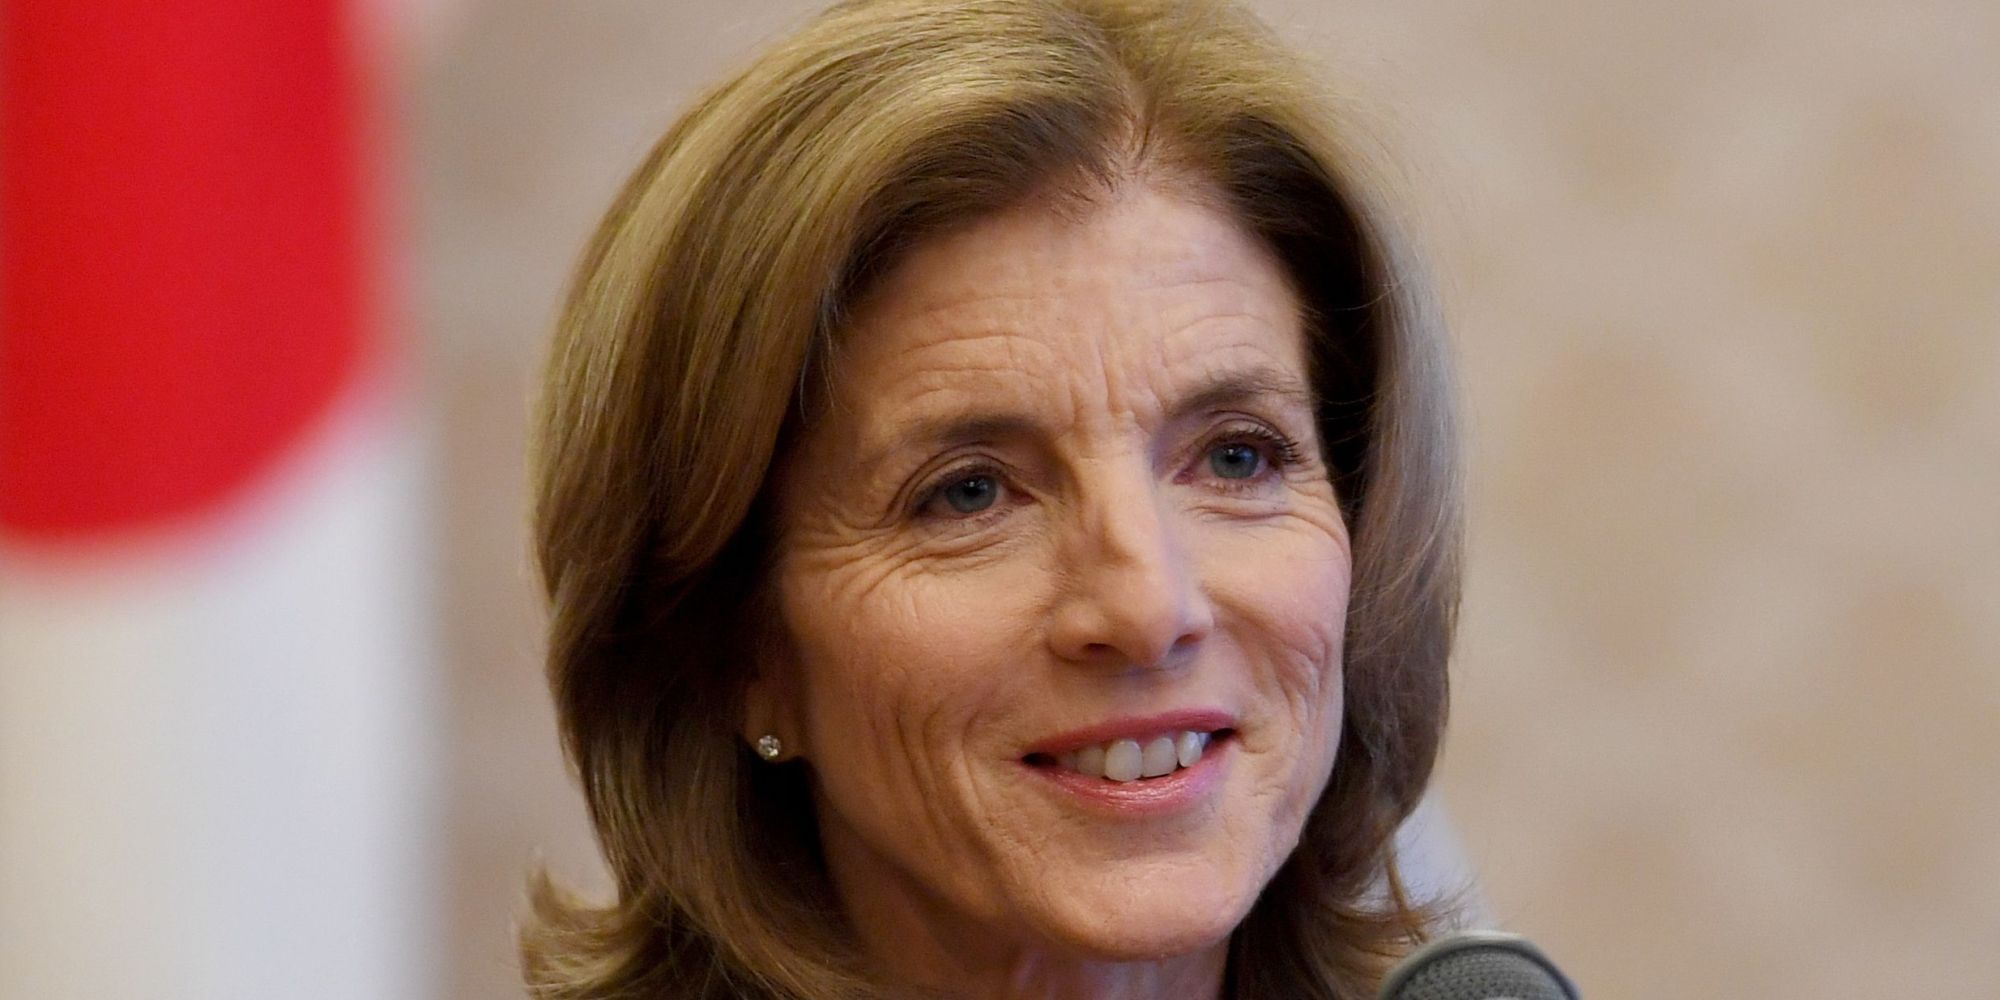 Caroline bouvier kennedy (born november 27, 1957) is an american author, at...